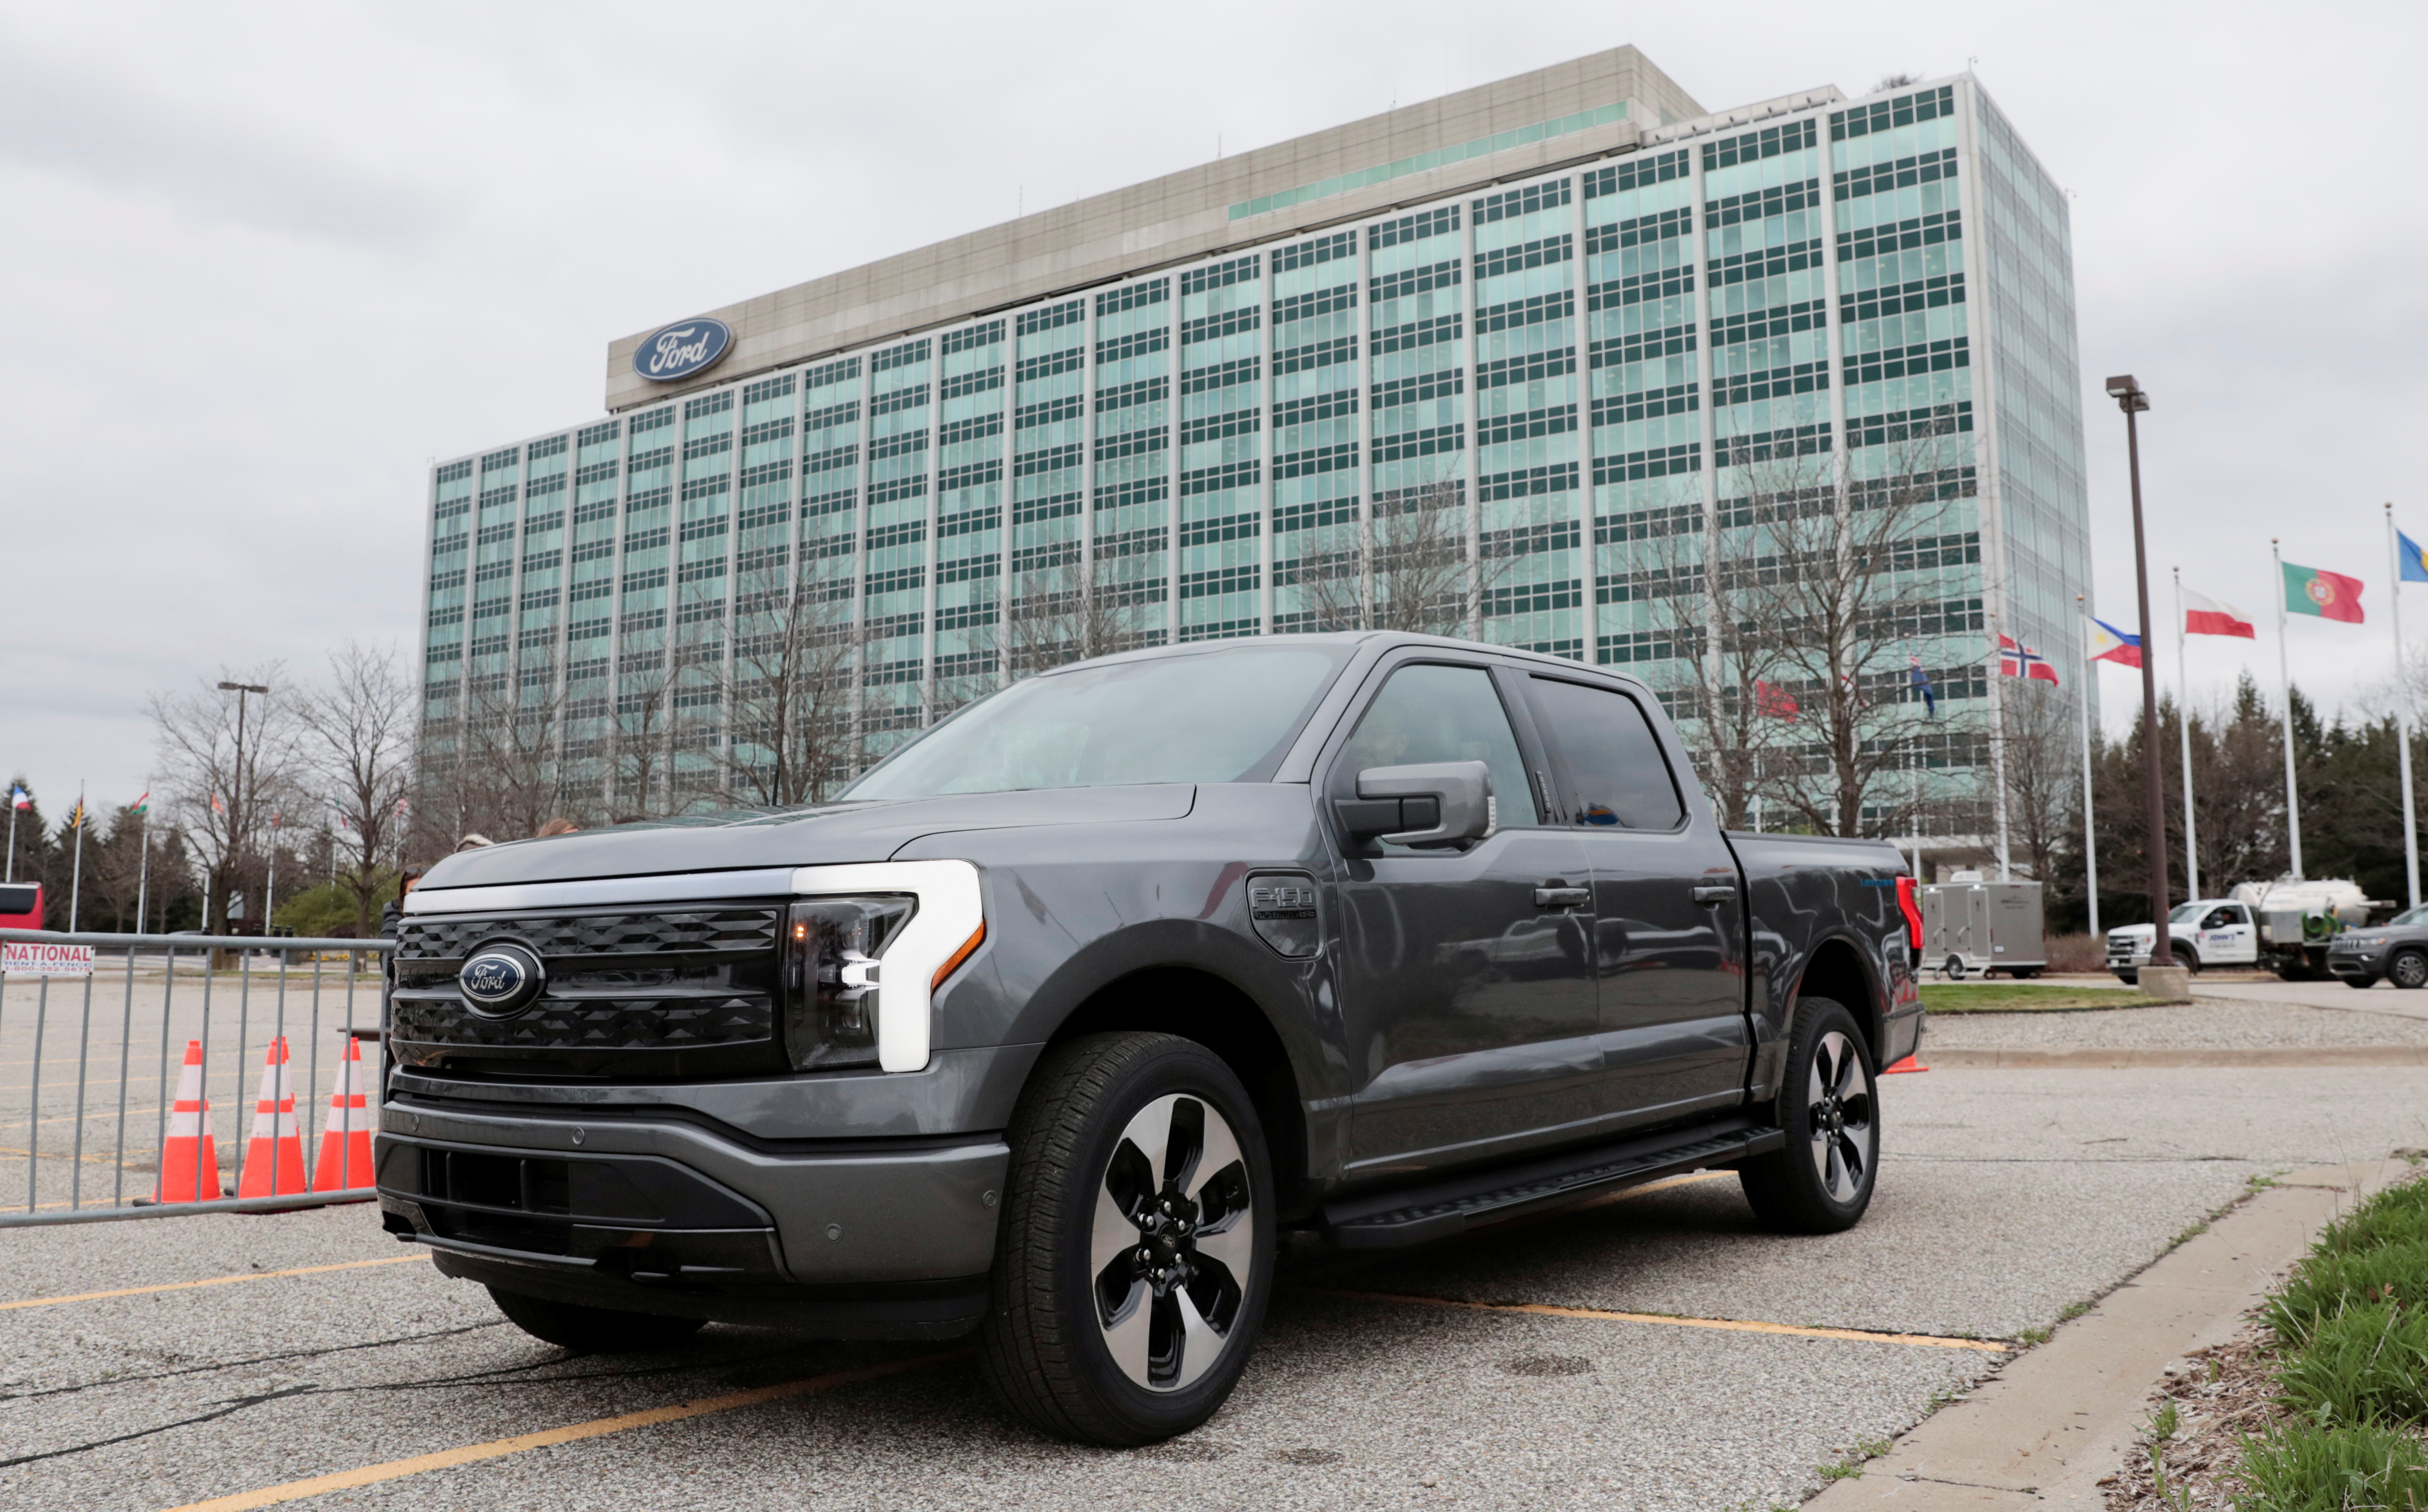 A model of the all-new Ford F-150 Lightning electric pickup is parked in front of the Ford Motor Company World Headquarters in Dearborn